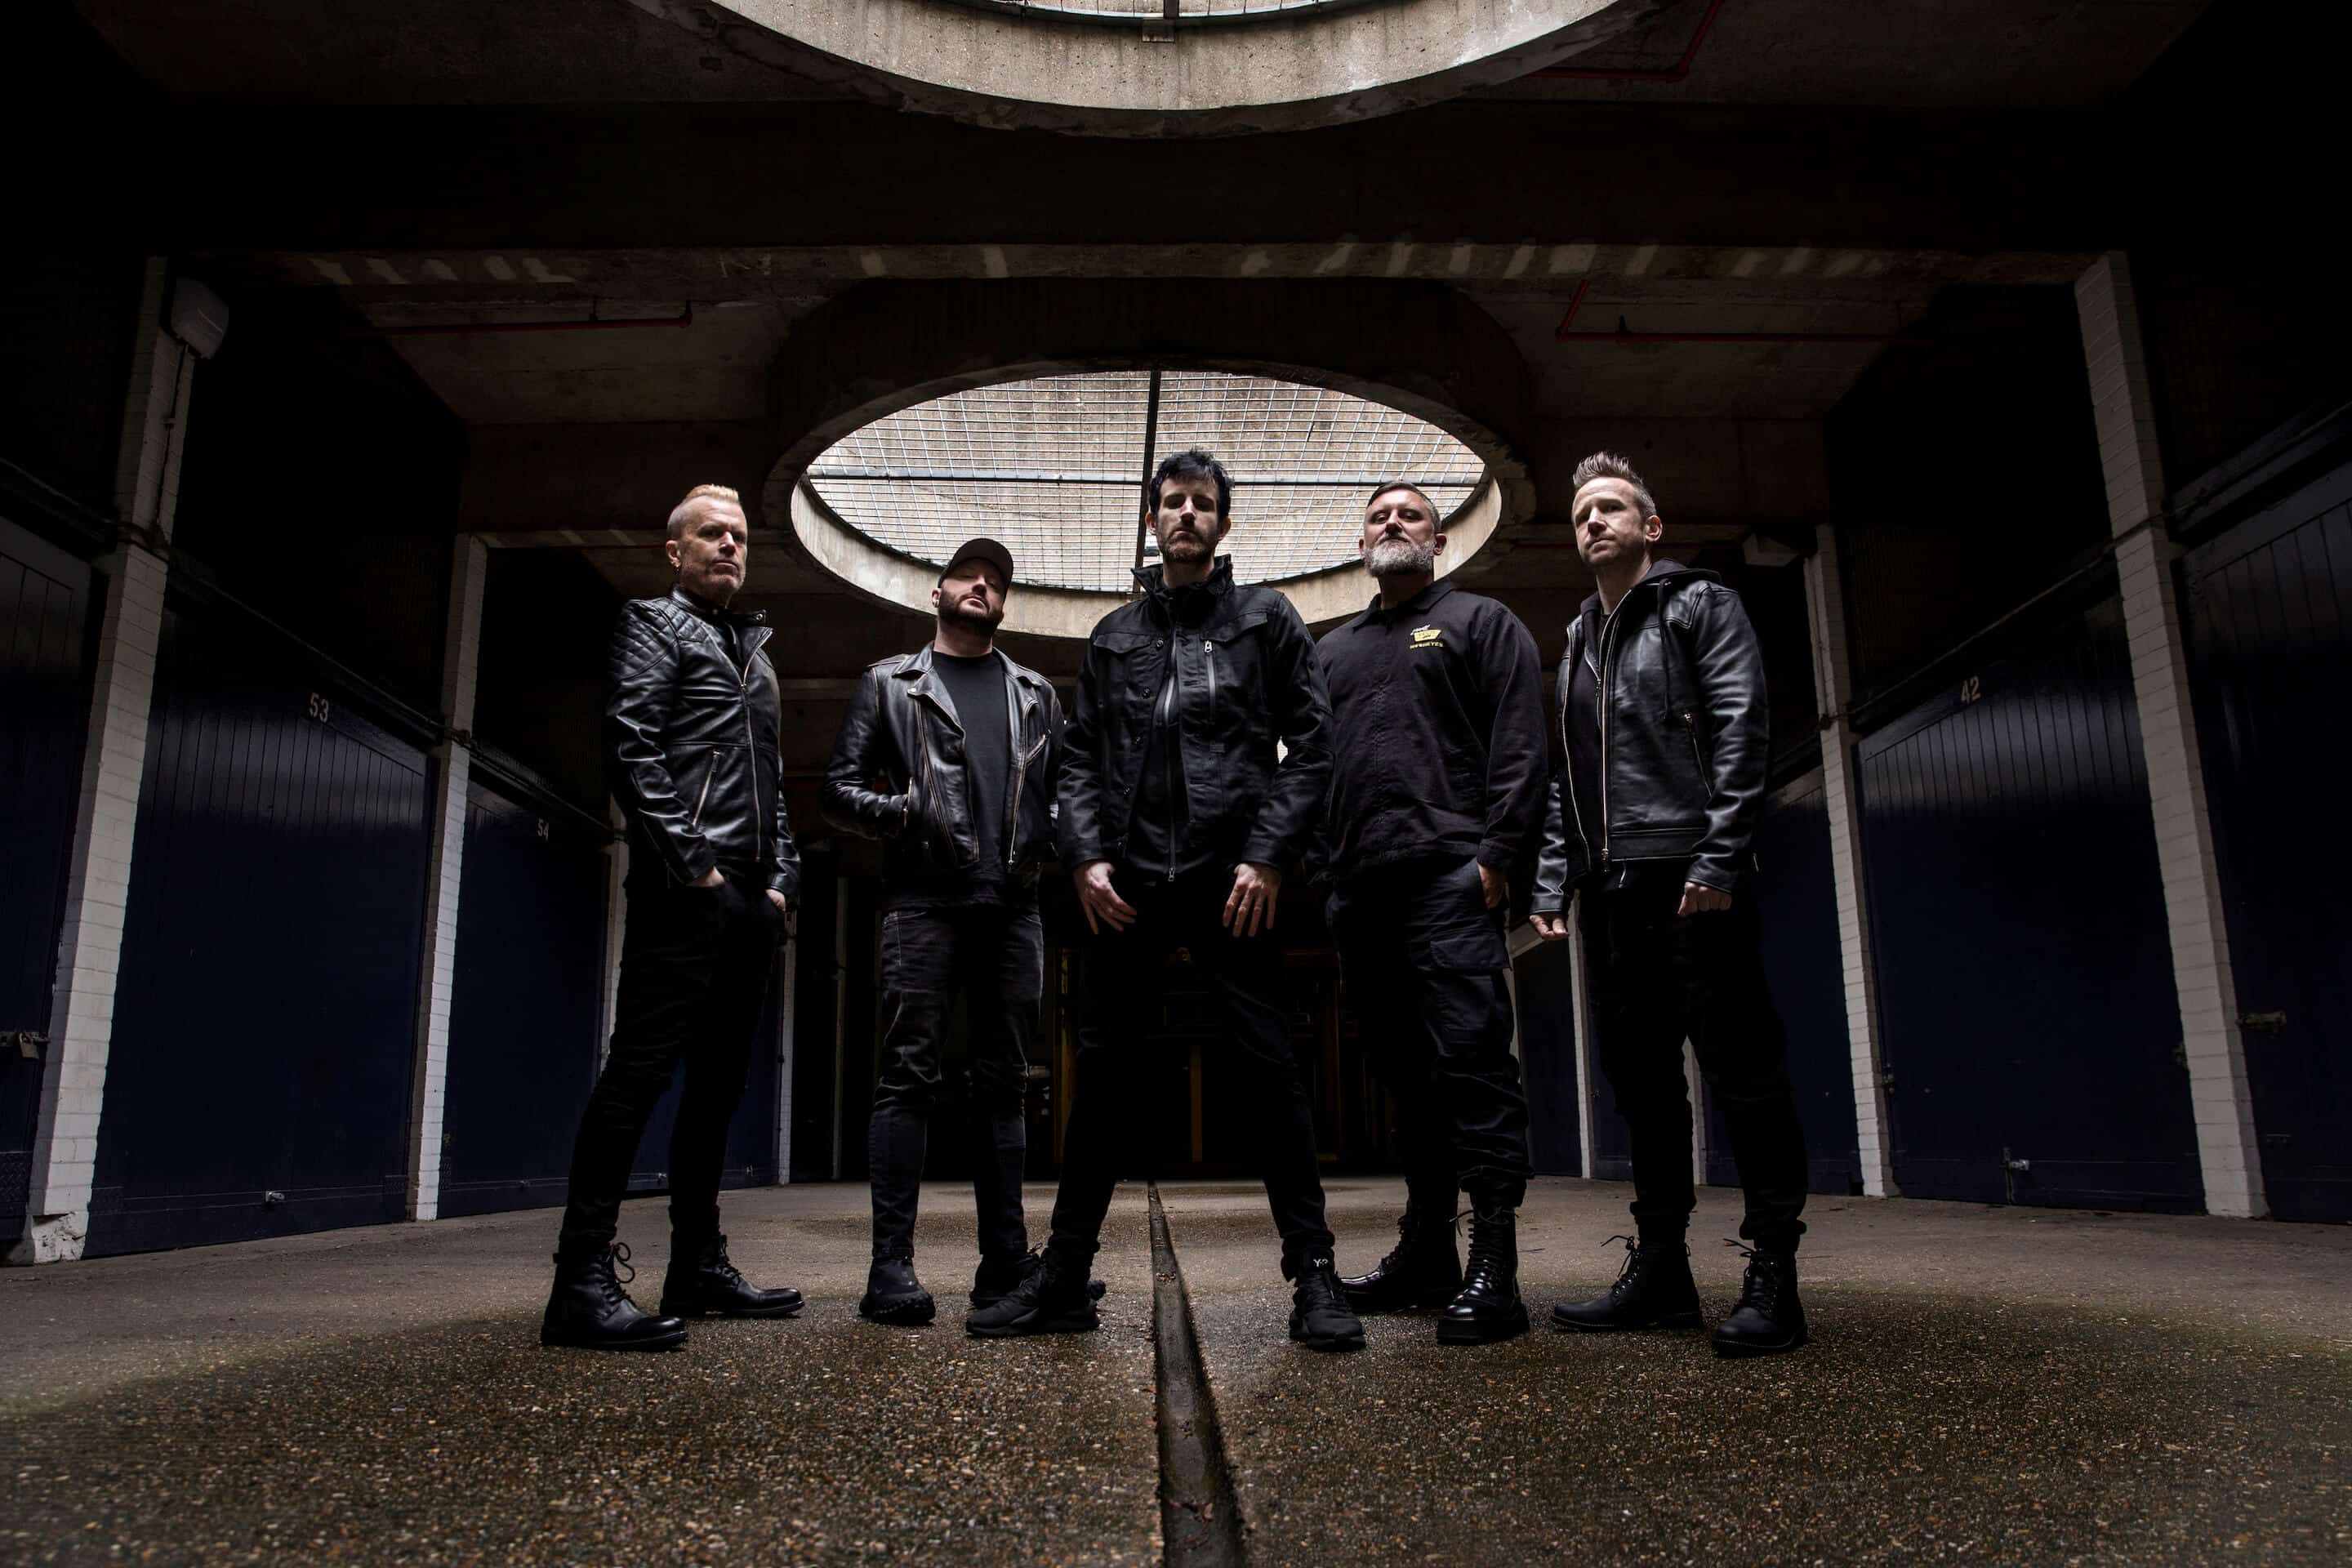 Pendulum continue to share new music with the release of ‘Colourfast’: Listen